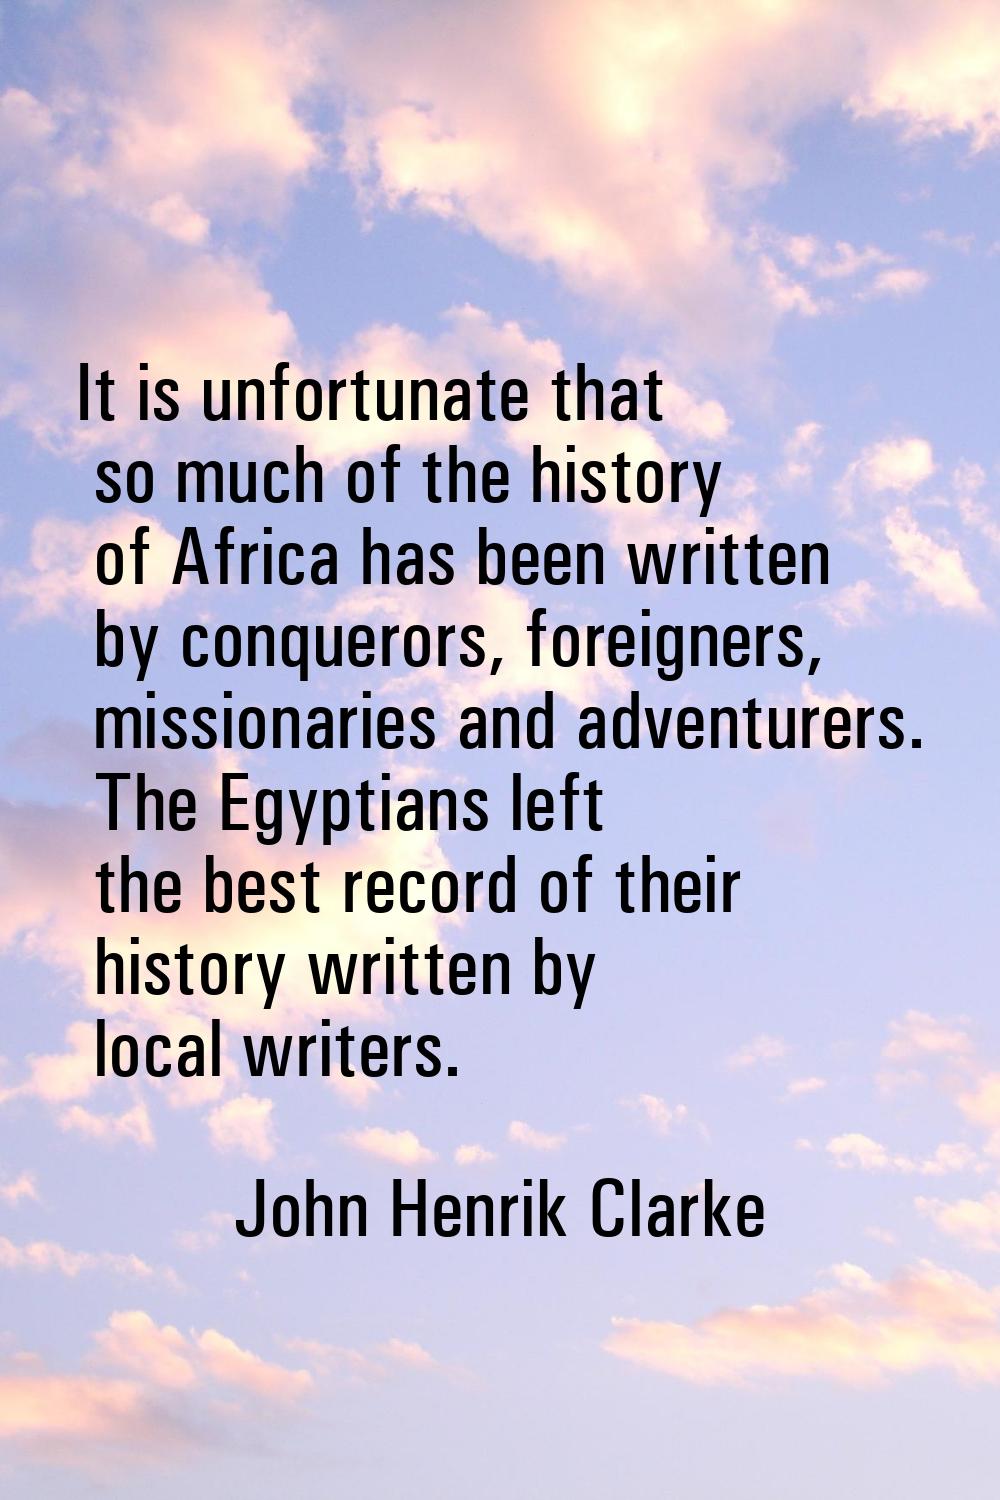 It is unfortunate that so much of the history of Africa has been written by conquerors, foreigners,